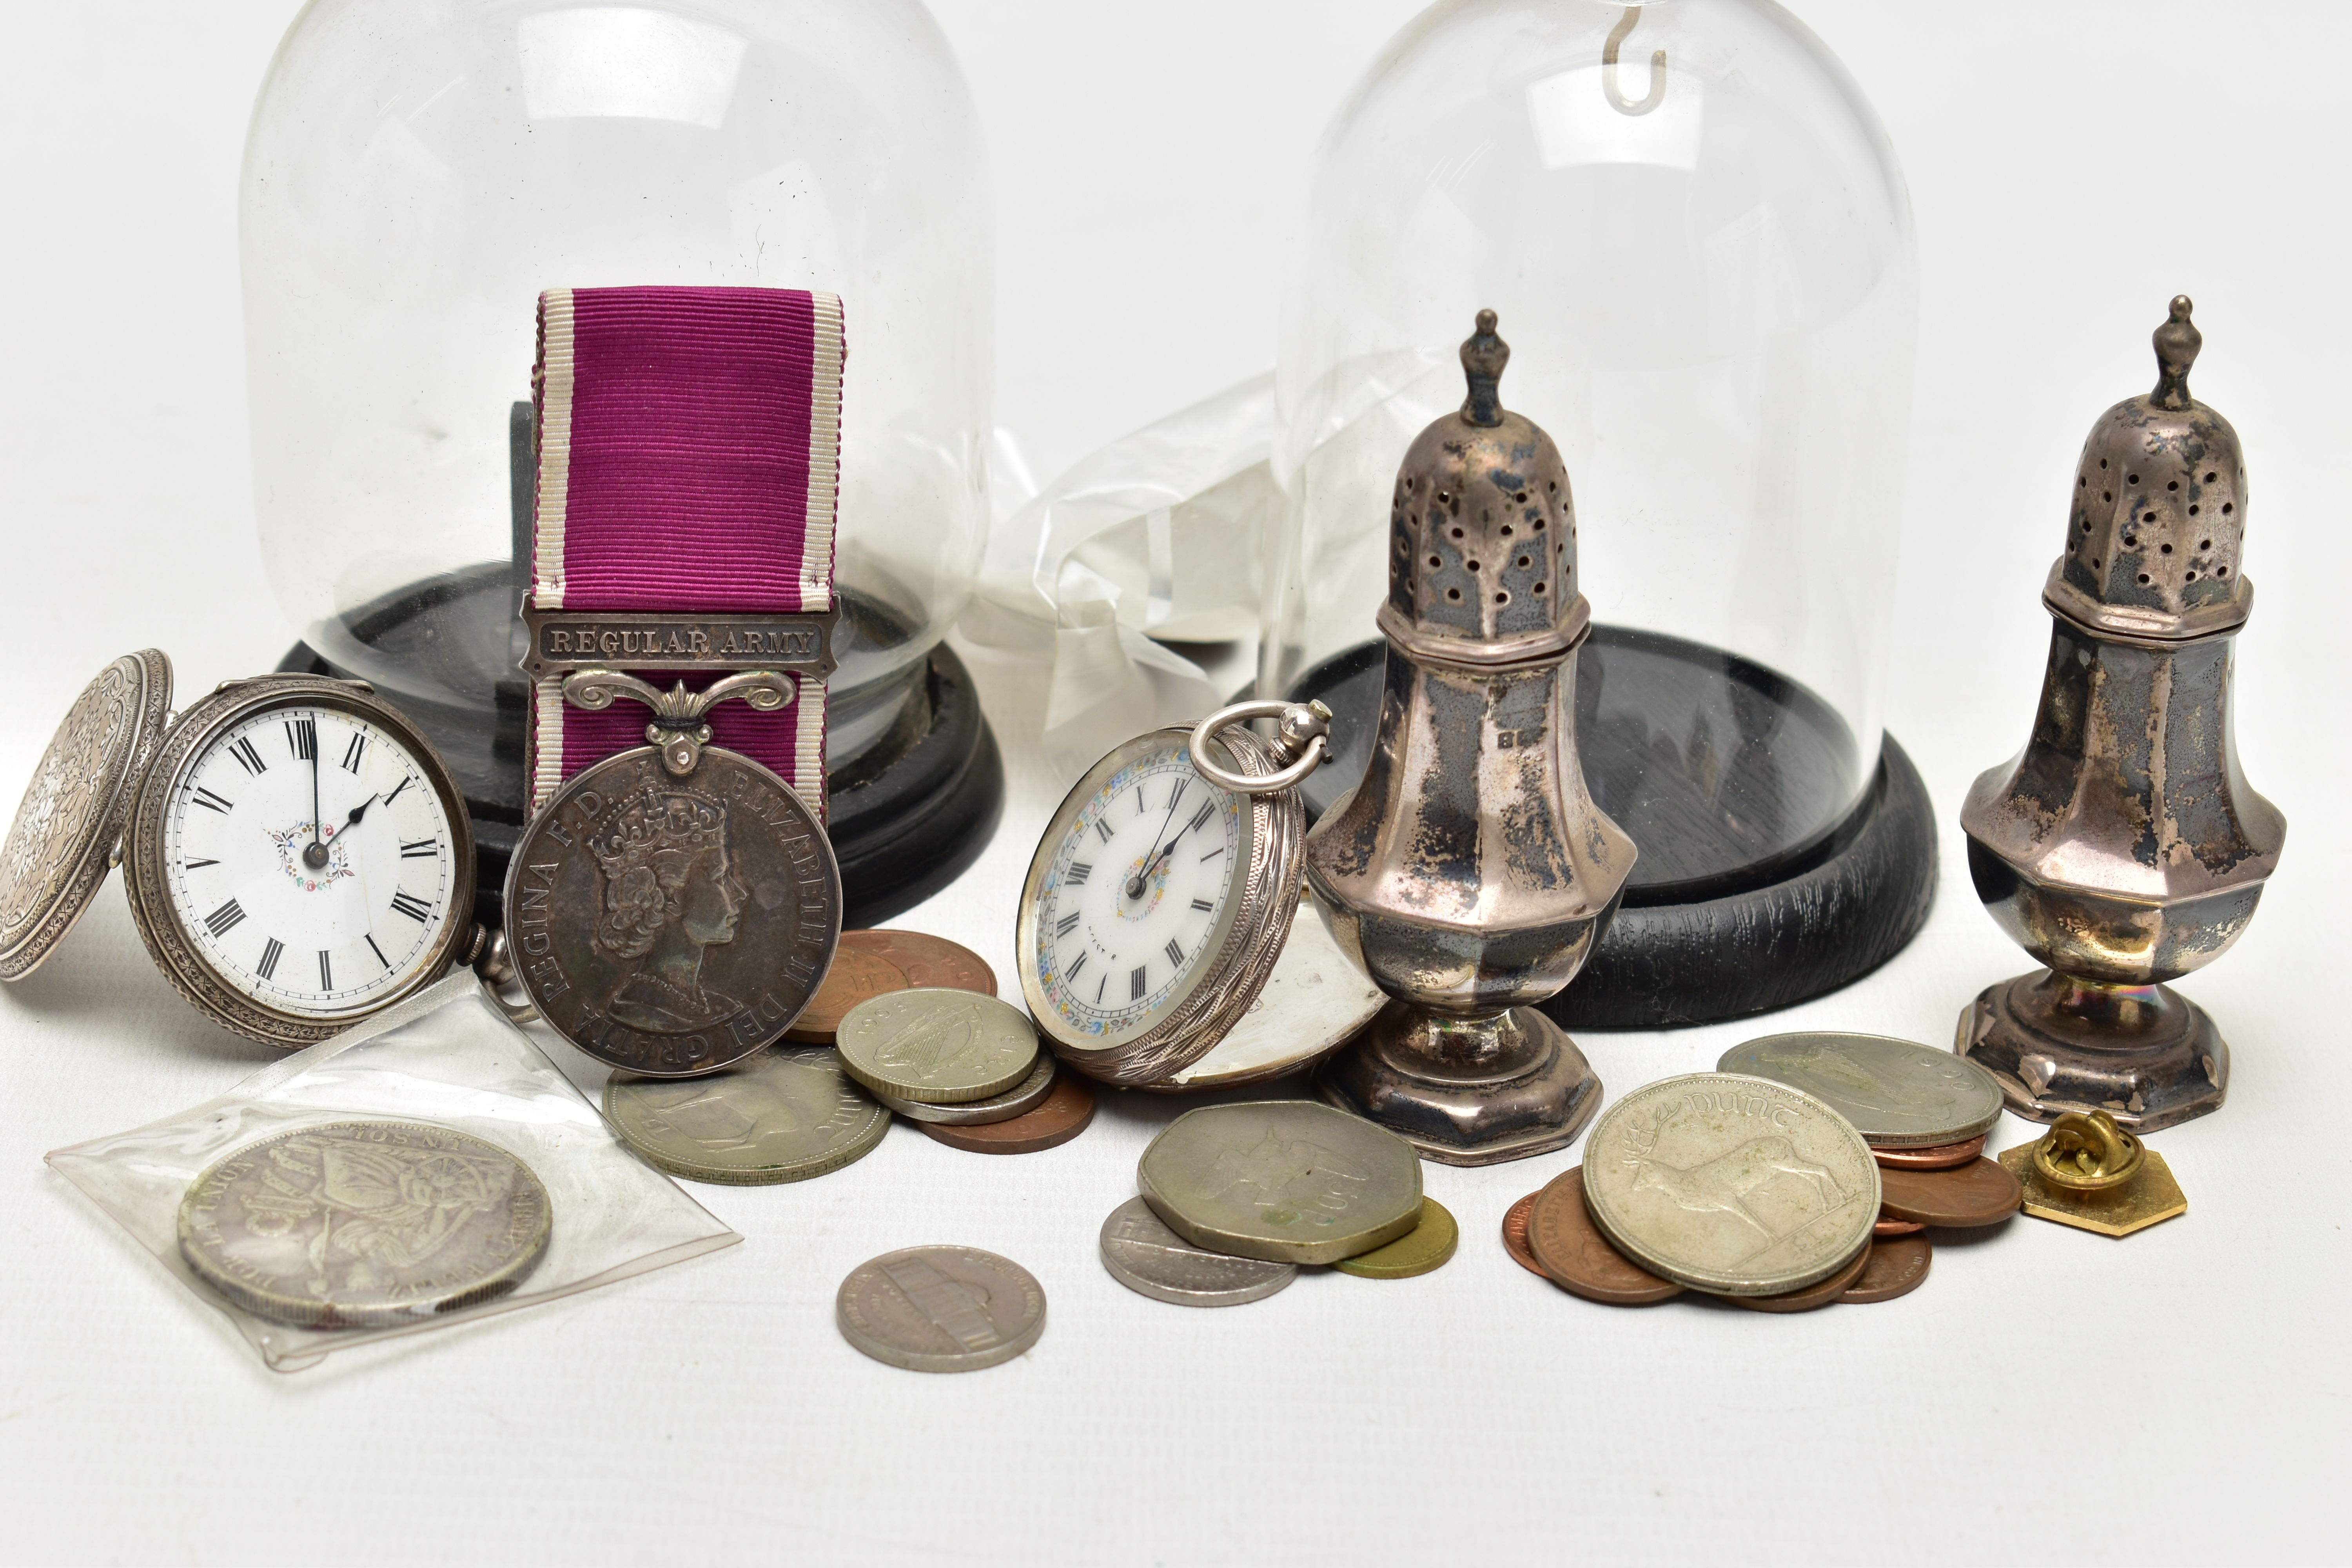 TWO SILVER OPEN FACE POCKET WATCHES WITH STANDS, SILVER PEPPERETTES AND OTHER ITEMS, to include